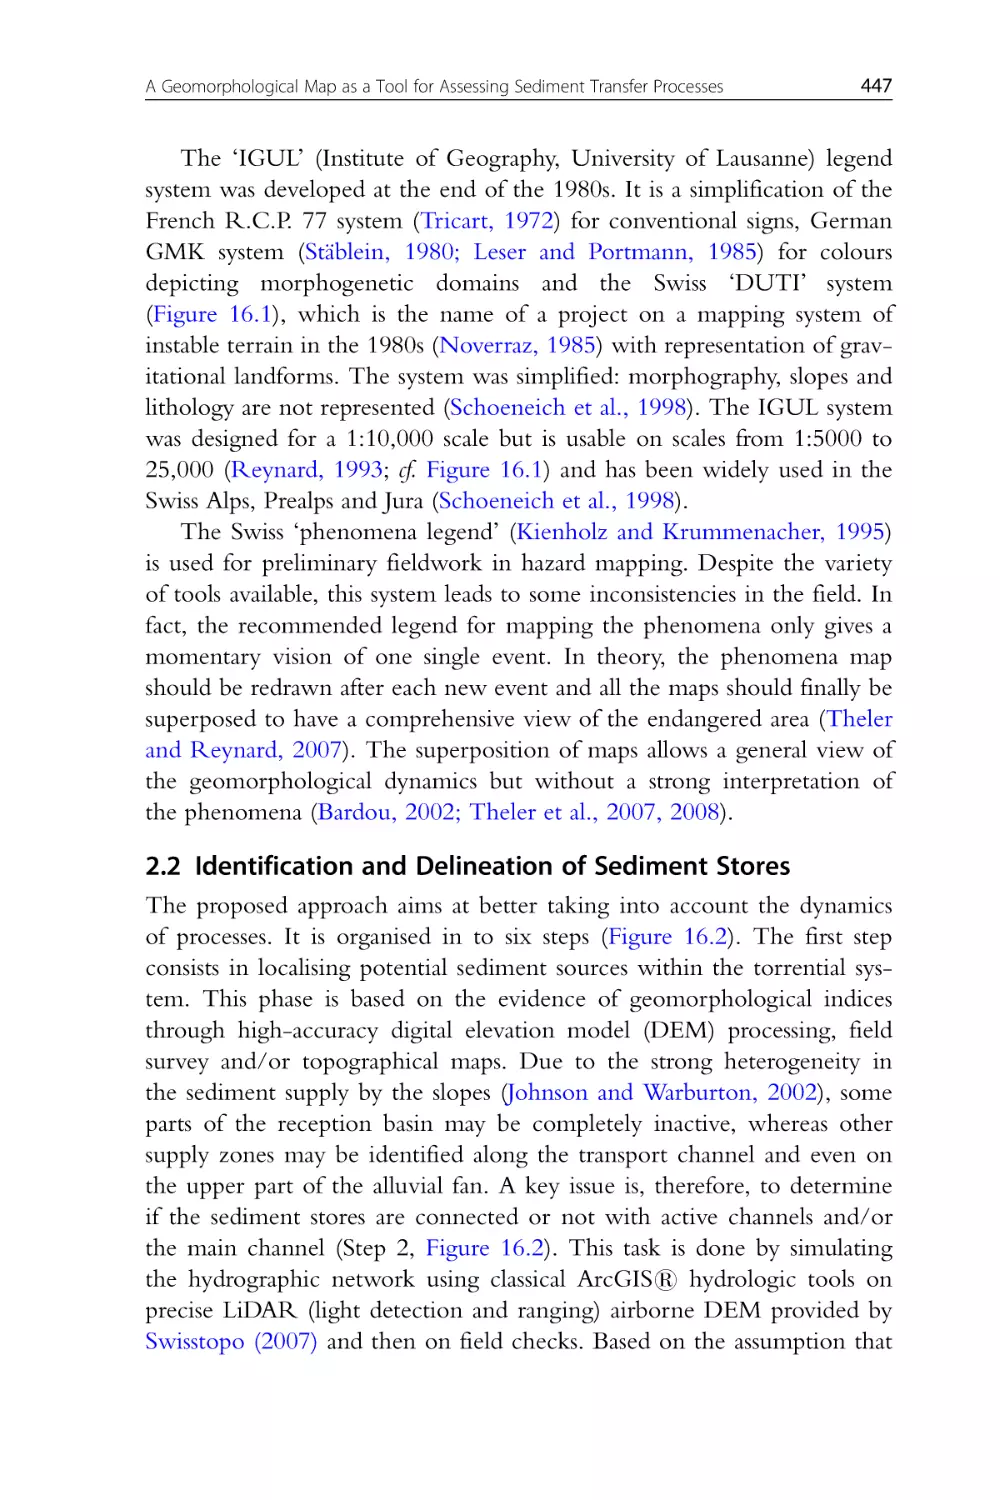 2.2 Identification and Delineation of Sediment Stores